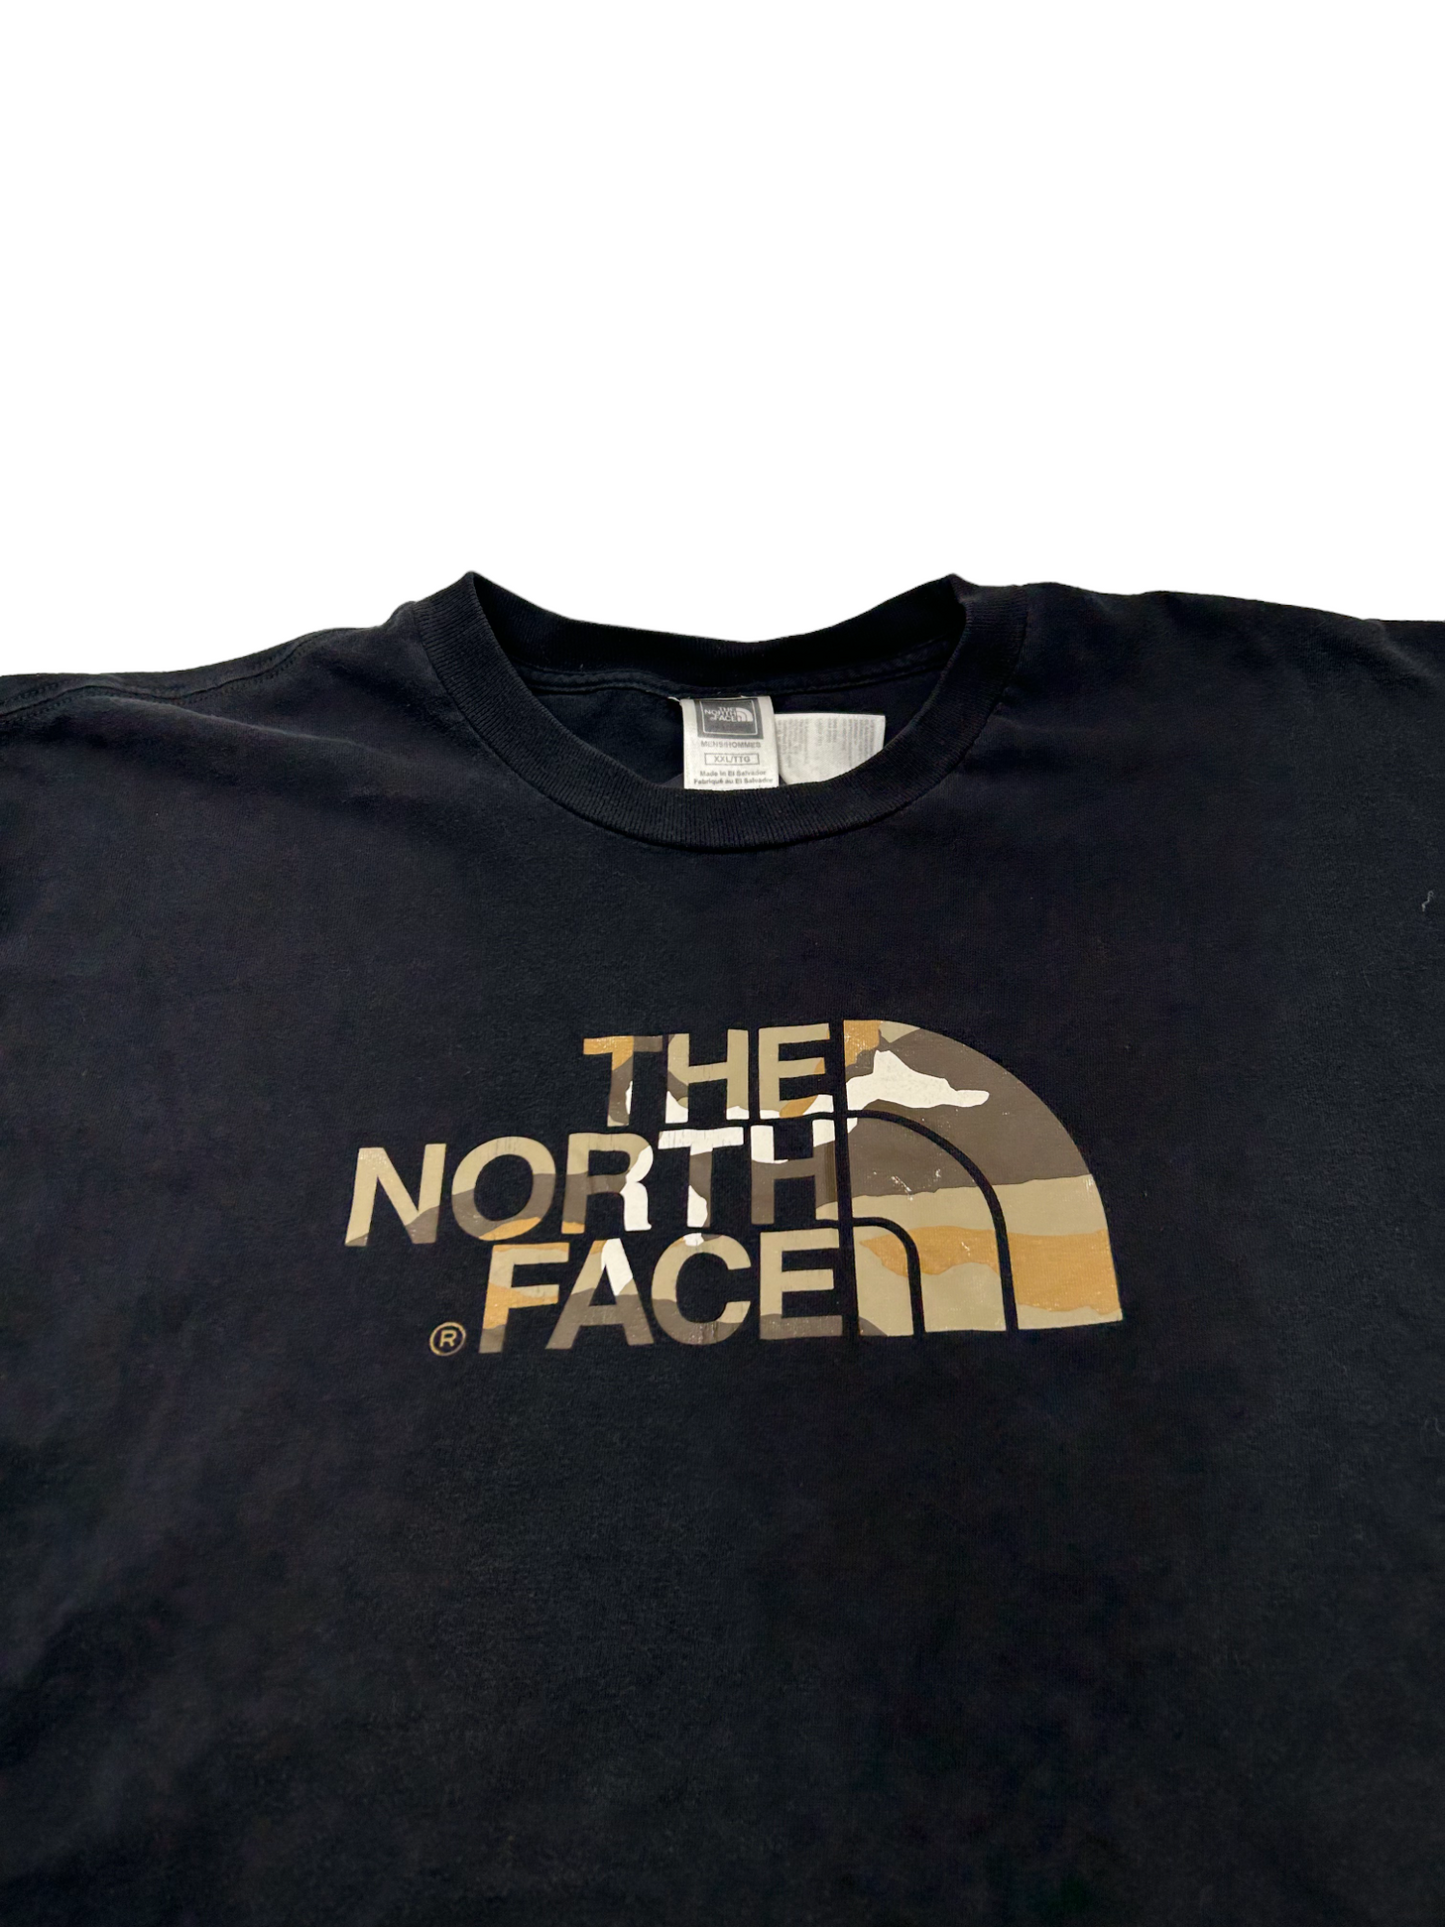 The North Face Camo T-Shirt